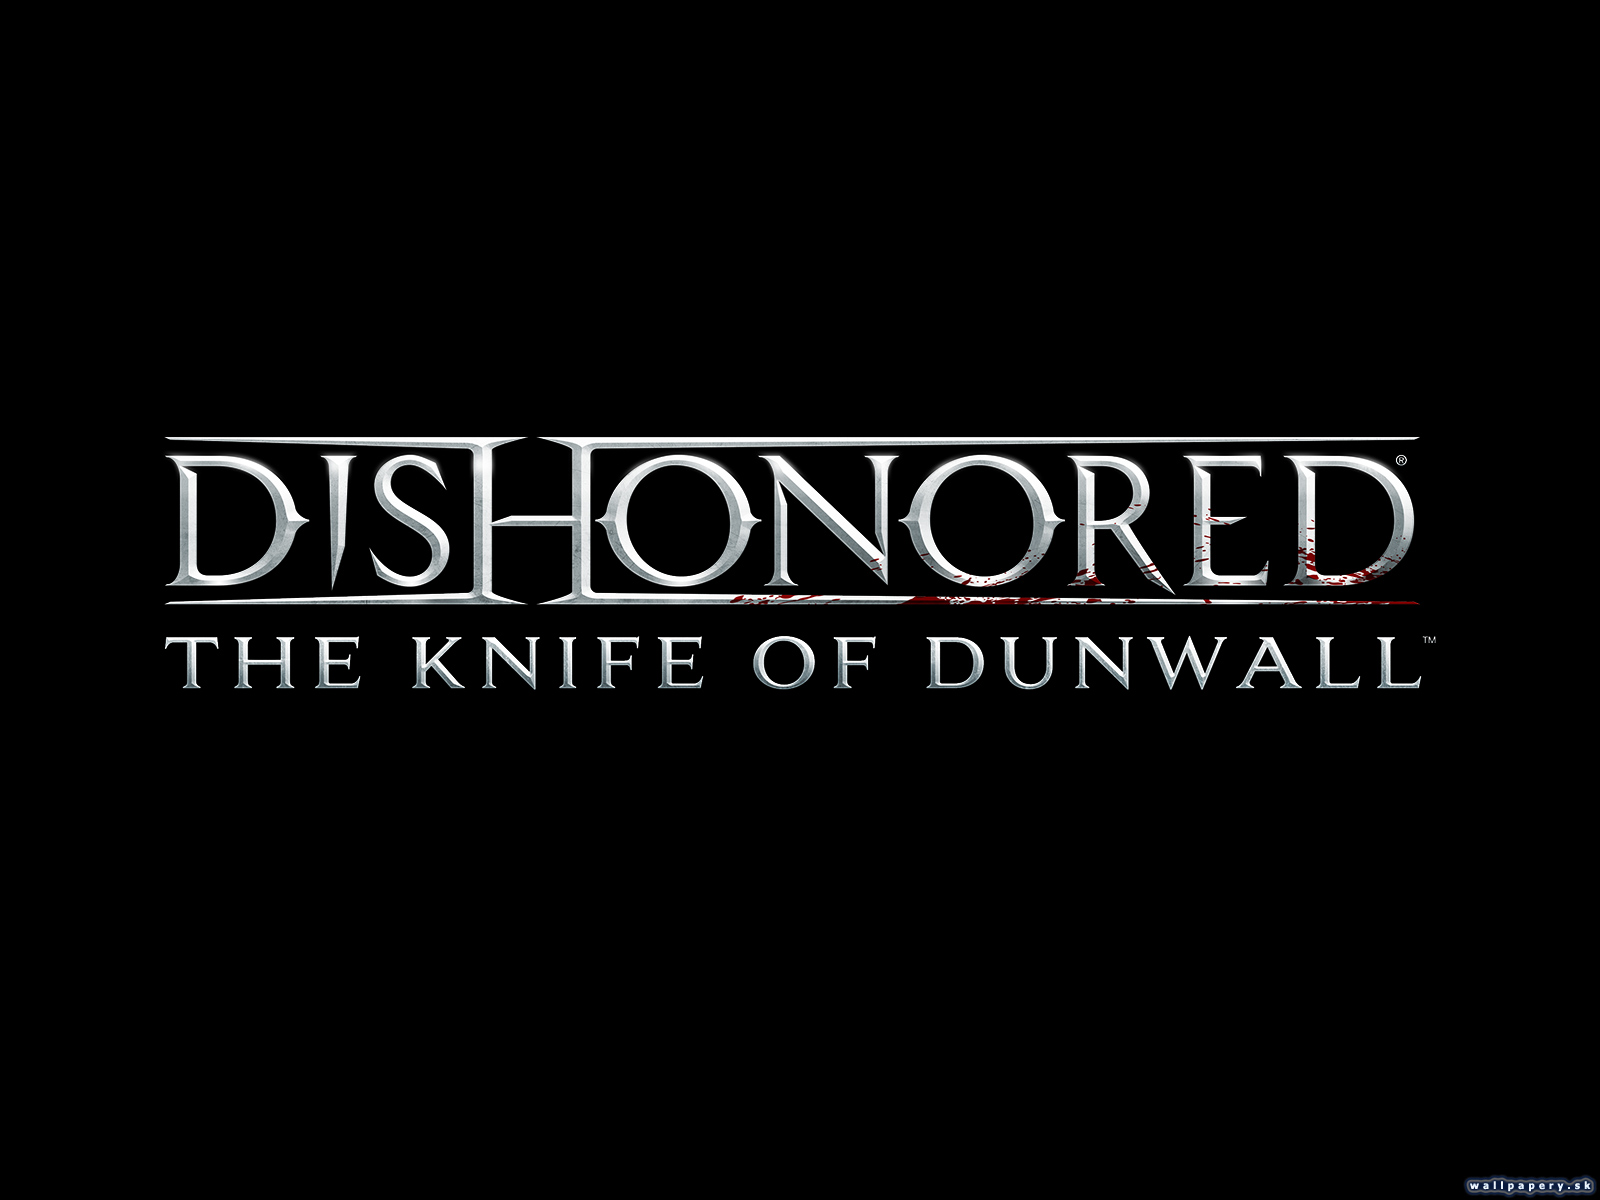 Dishonored: The Knife of Dunwall - wallpaper 2